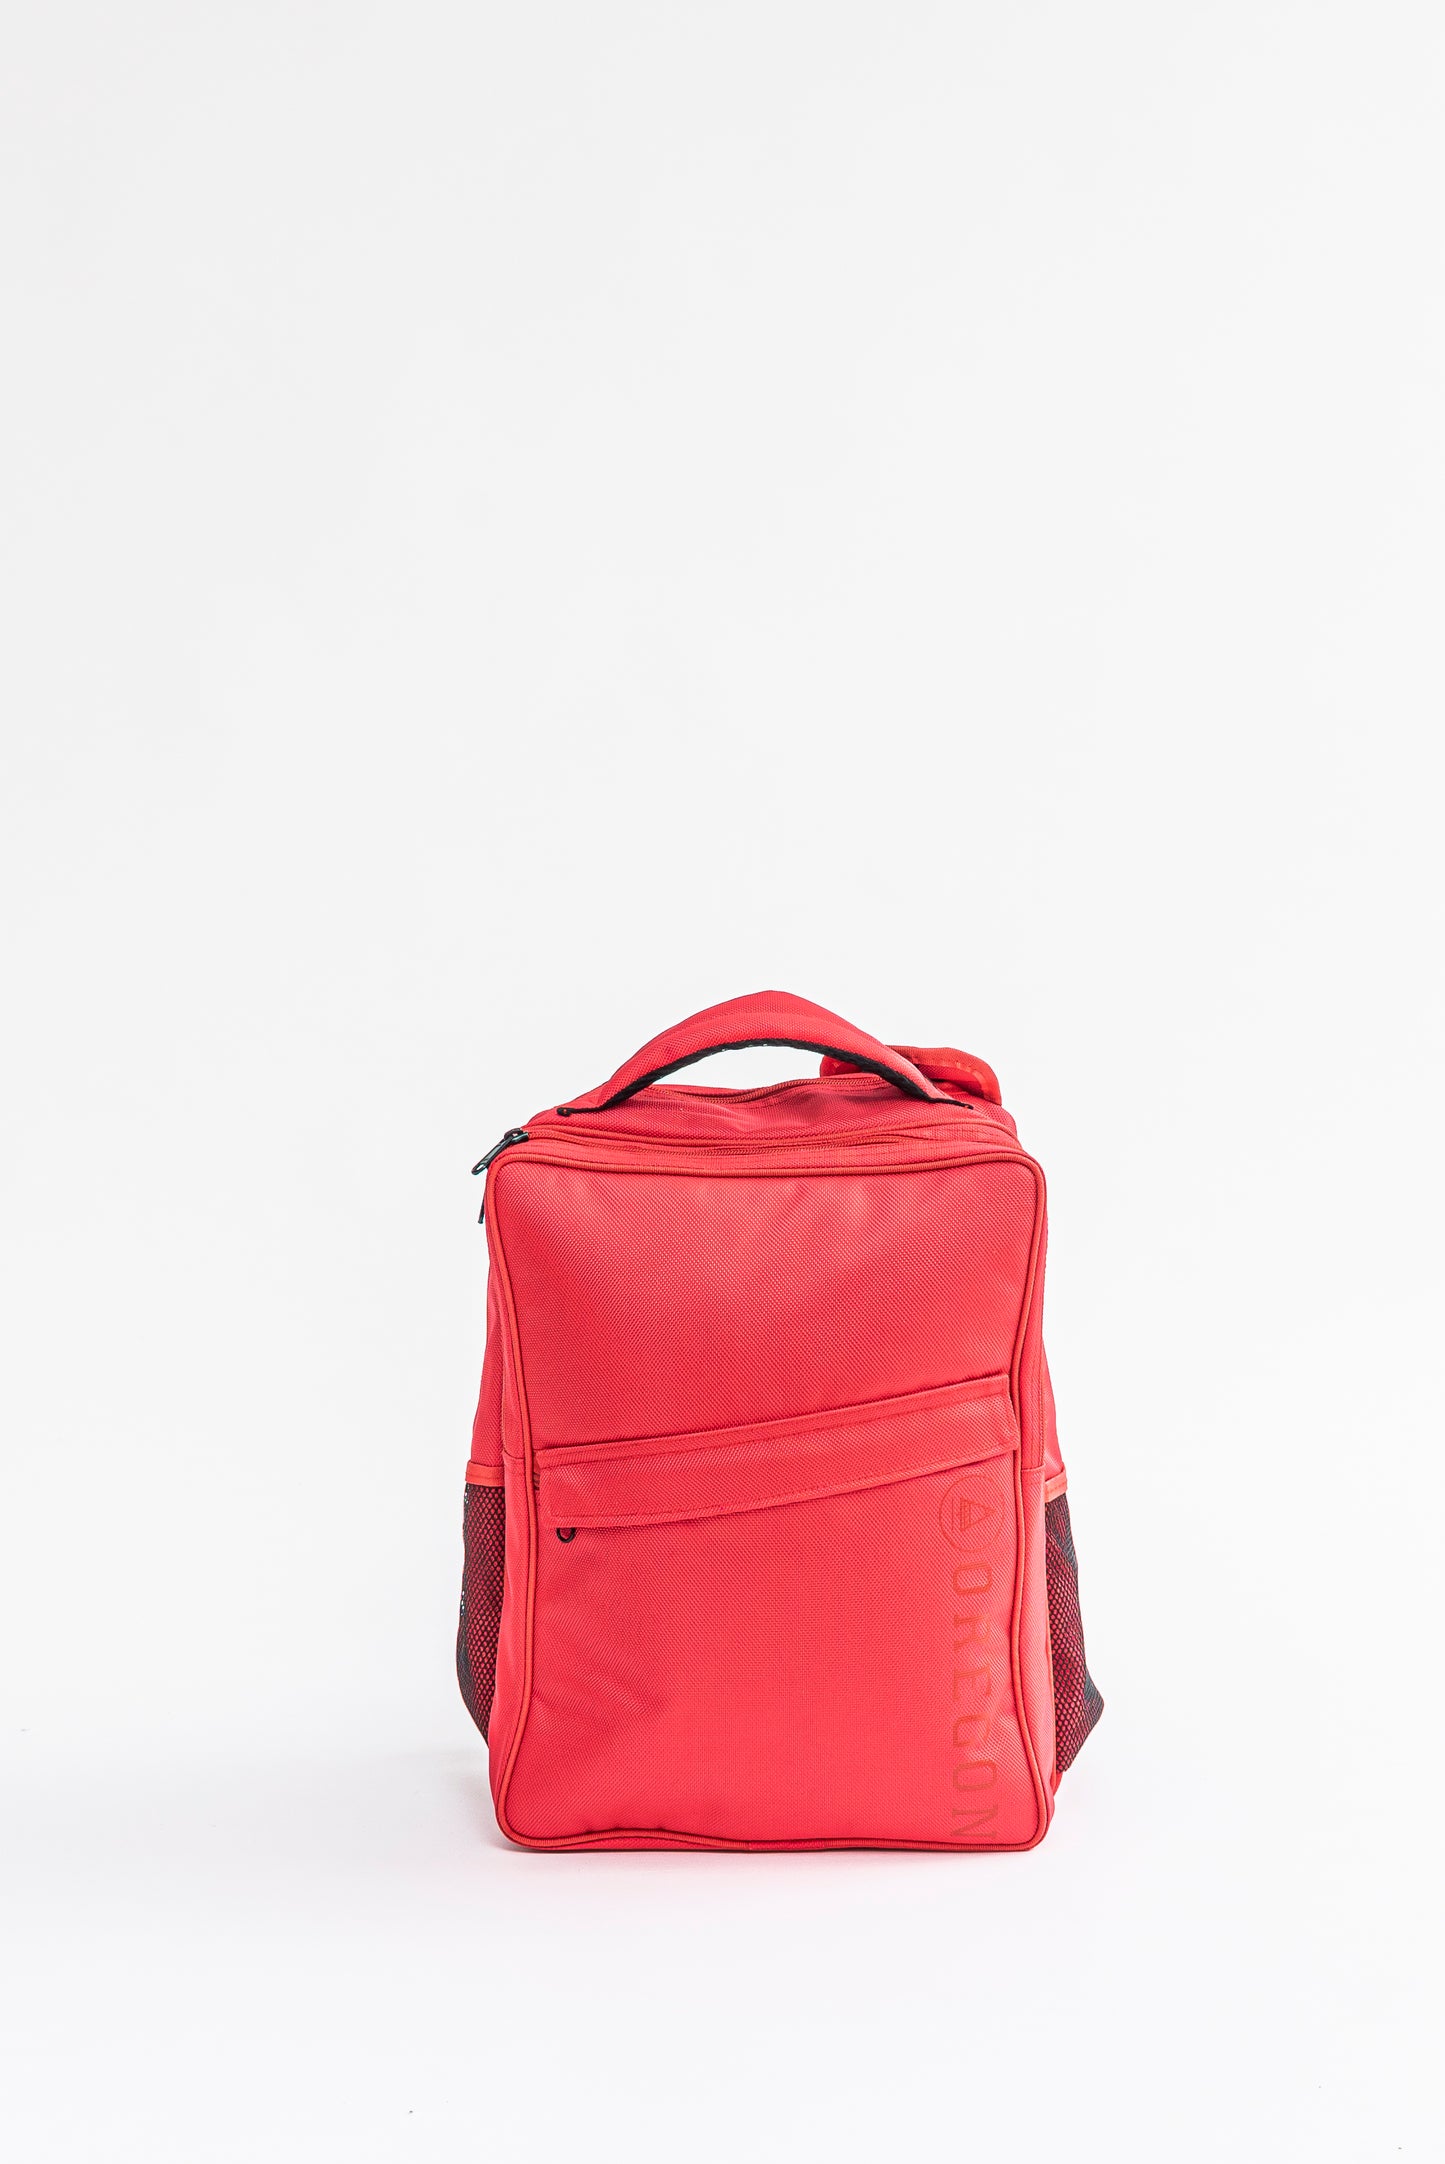 AUTHENTIC RED BACKPACK SENIOR